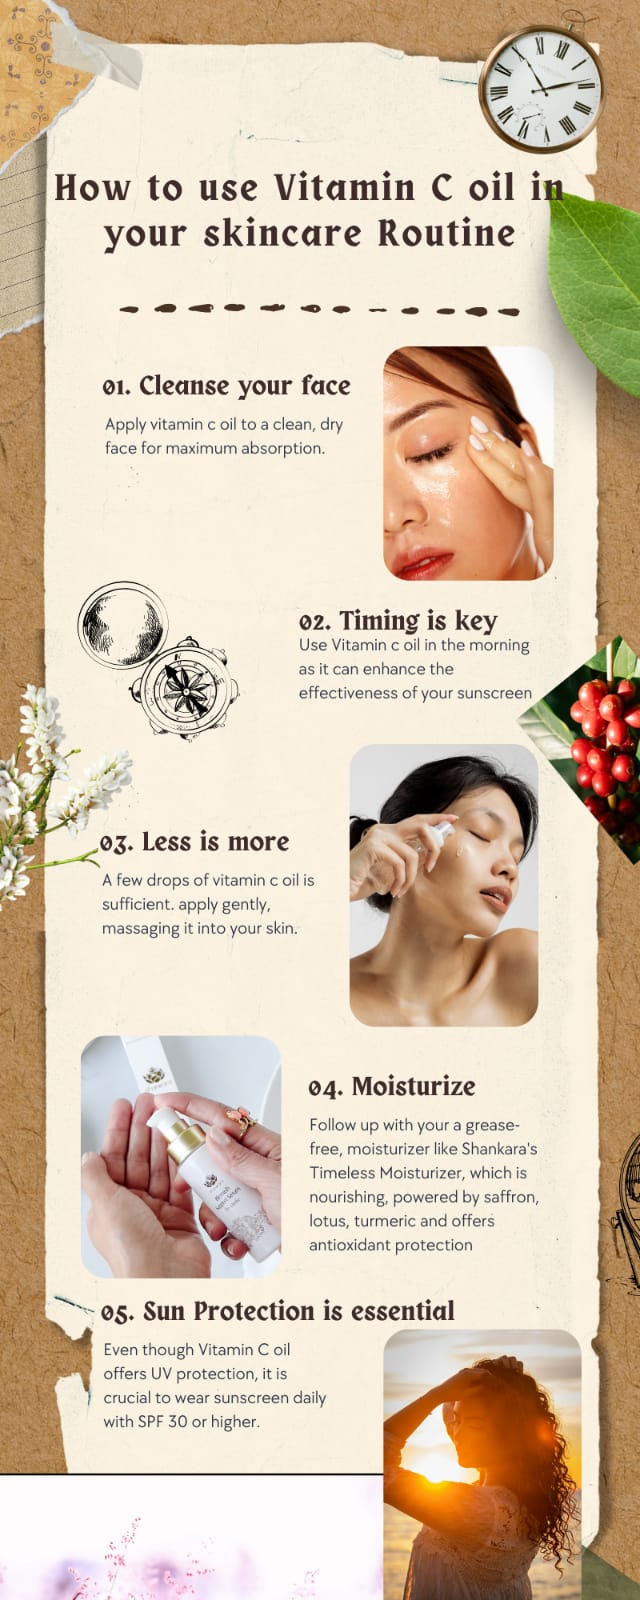 Step by step guide to applying vitamin C oil.